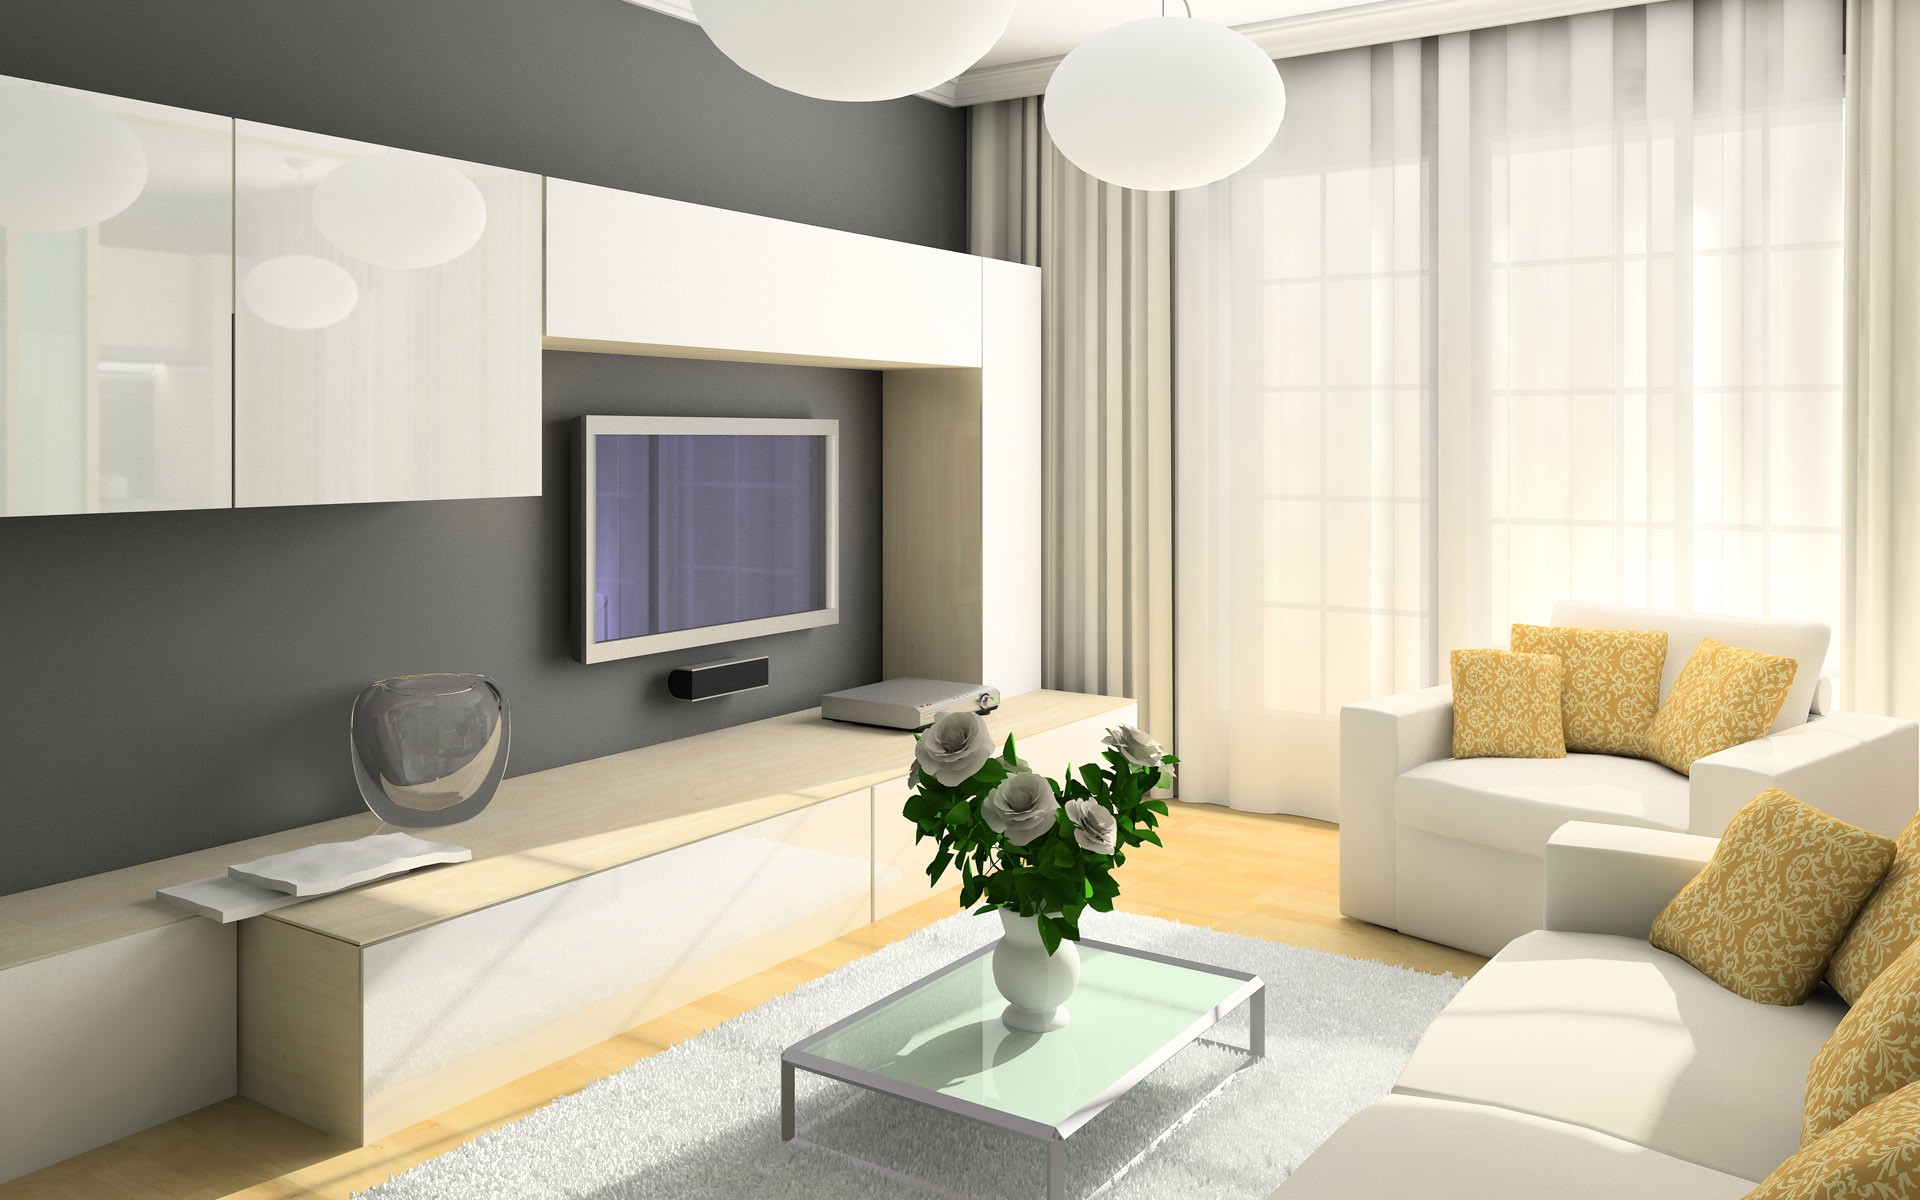 man made, room, cushion, flower, lounge, television